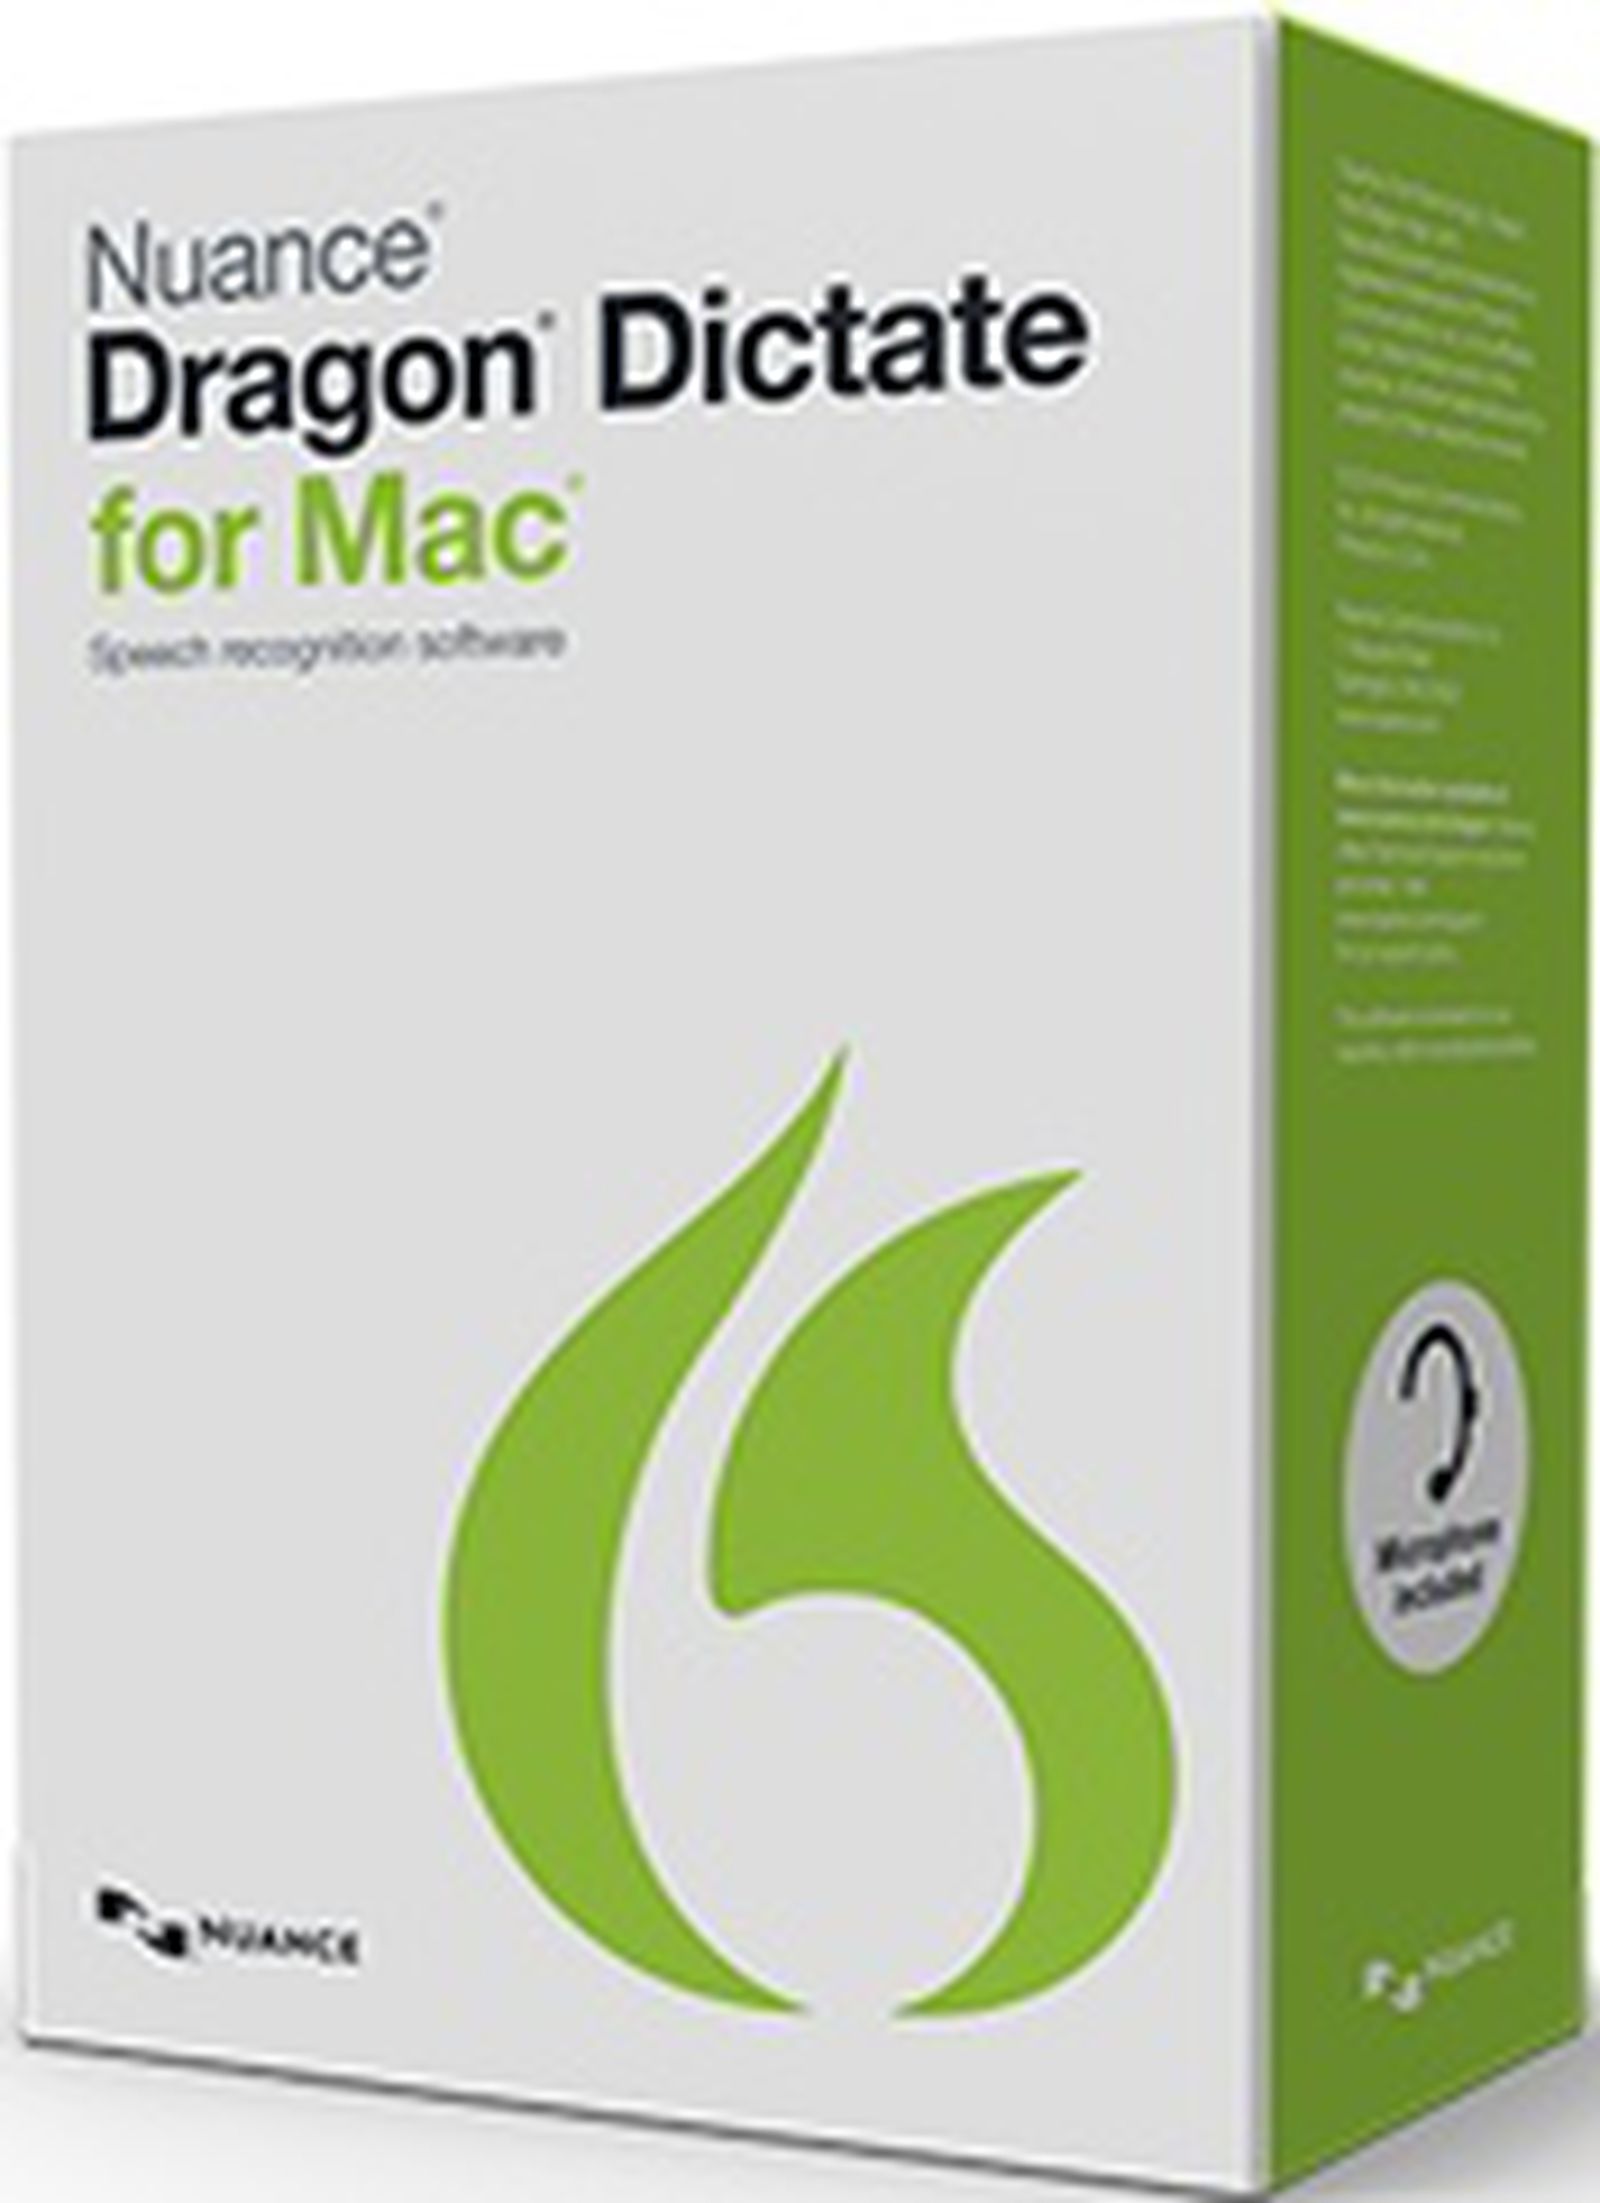 dragon software nuance for mac 2014 disk